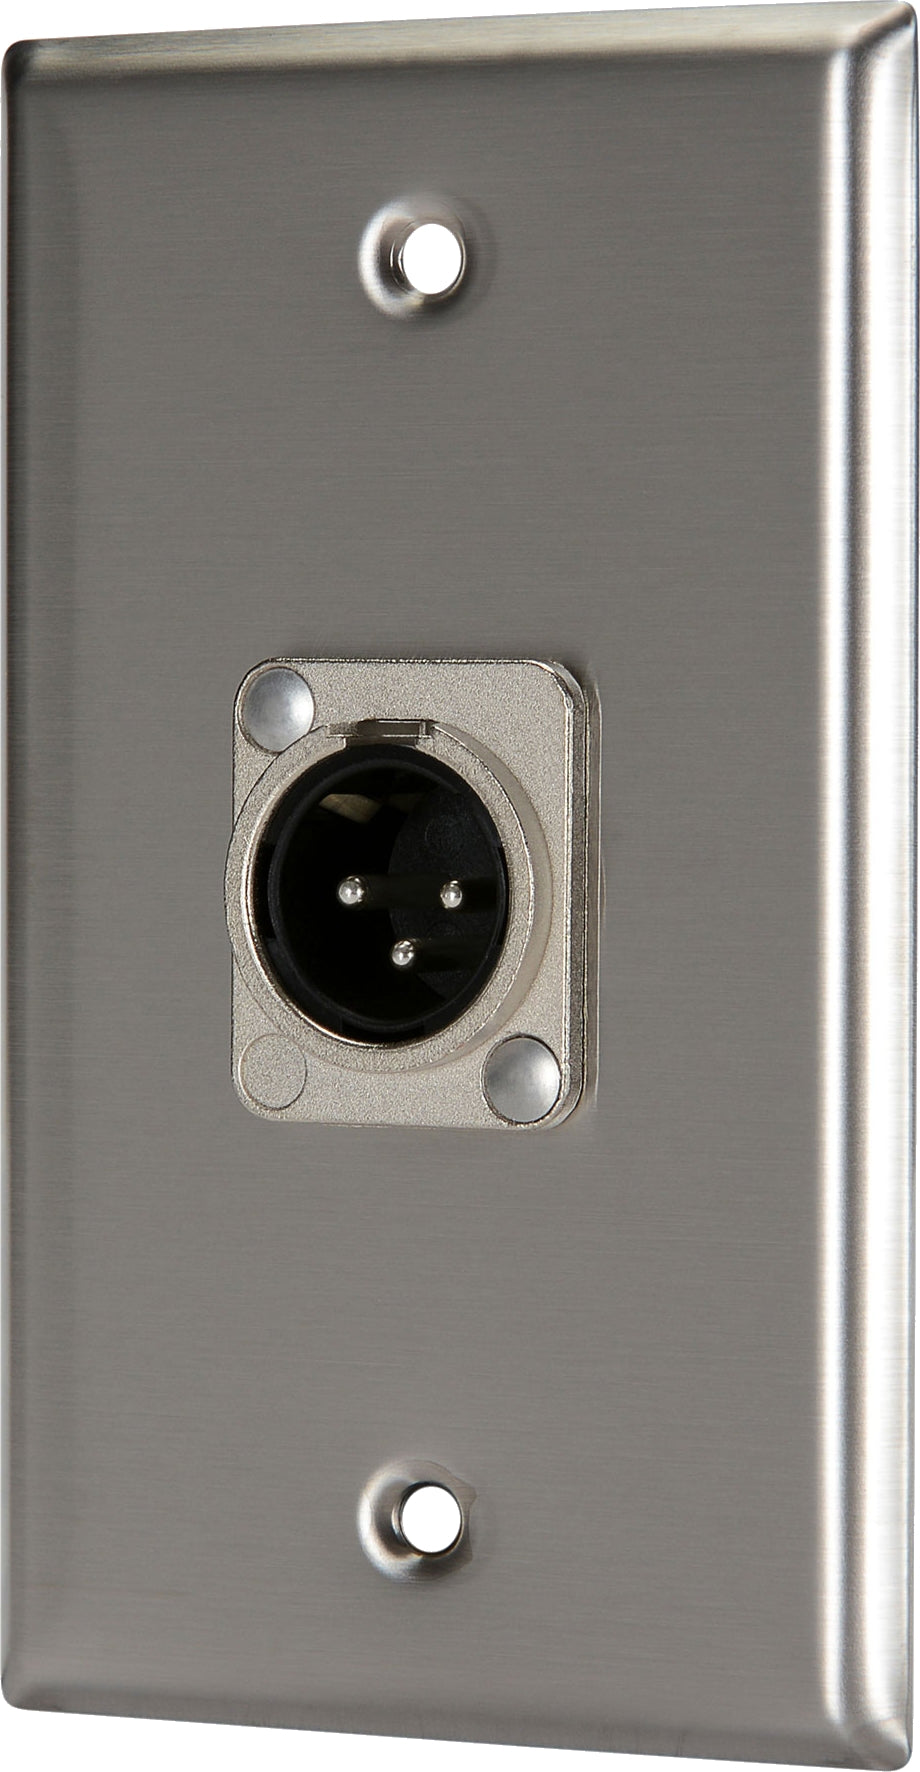 07-6072-01 Stainless Steel Wall Plate with 1*XLR Male